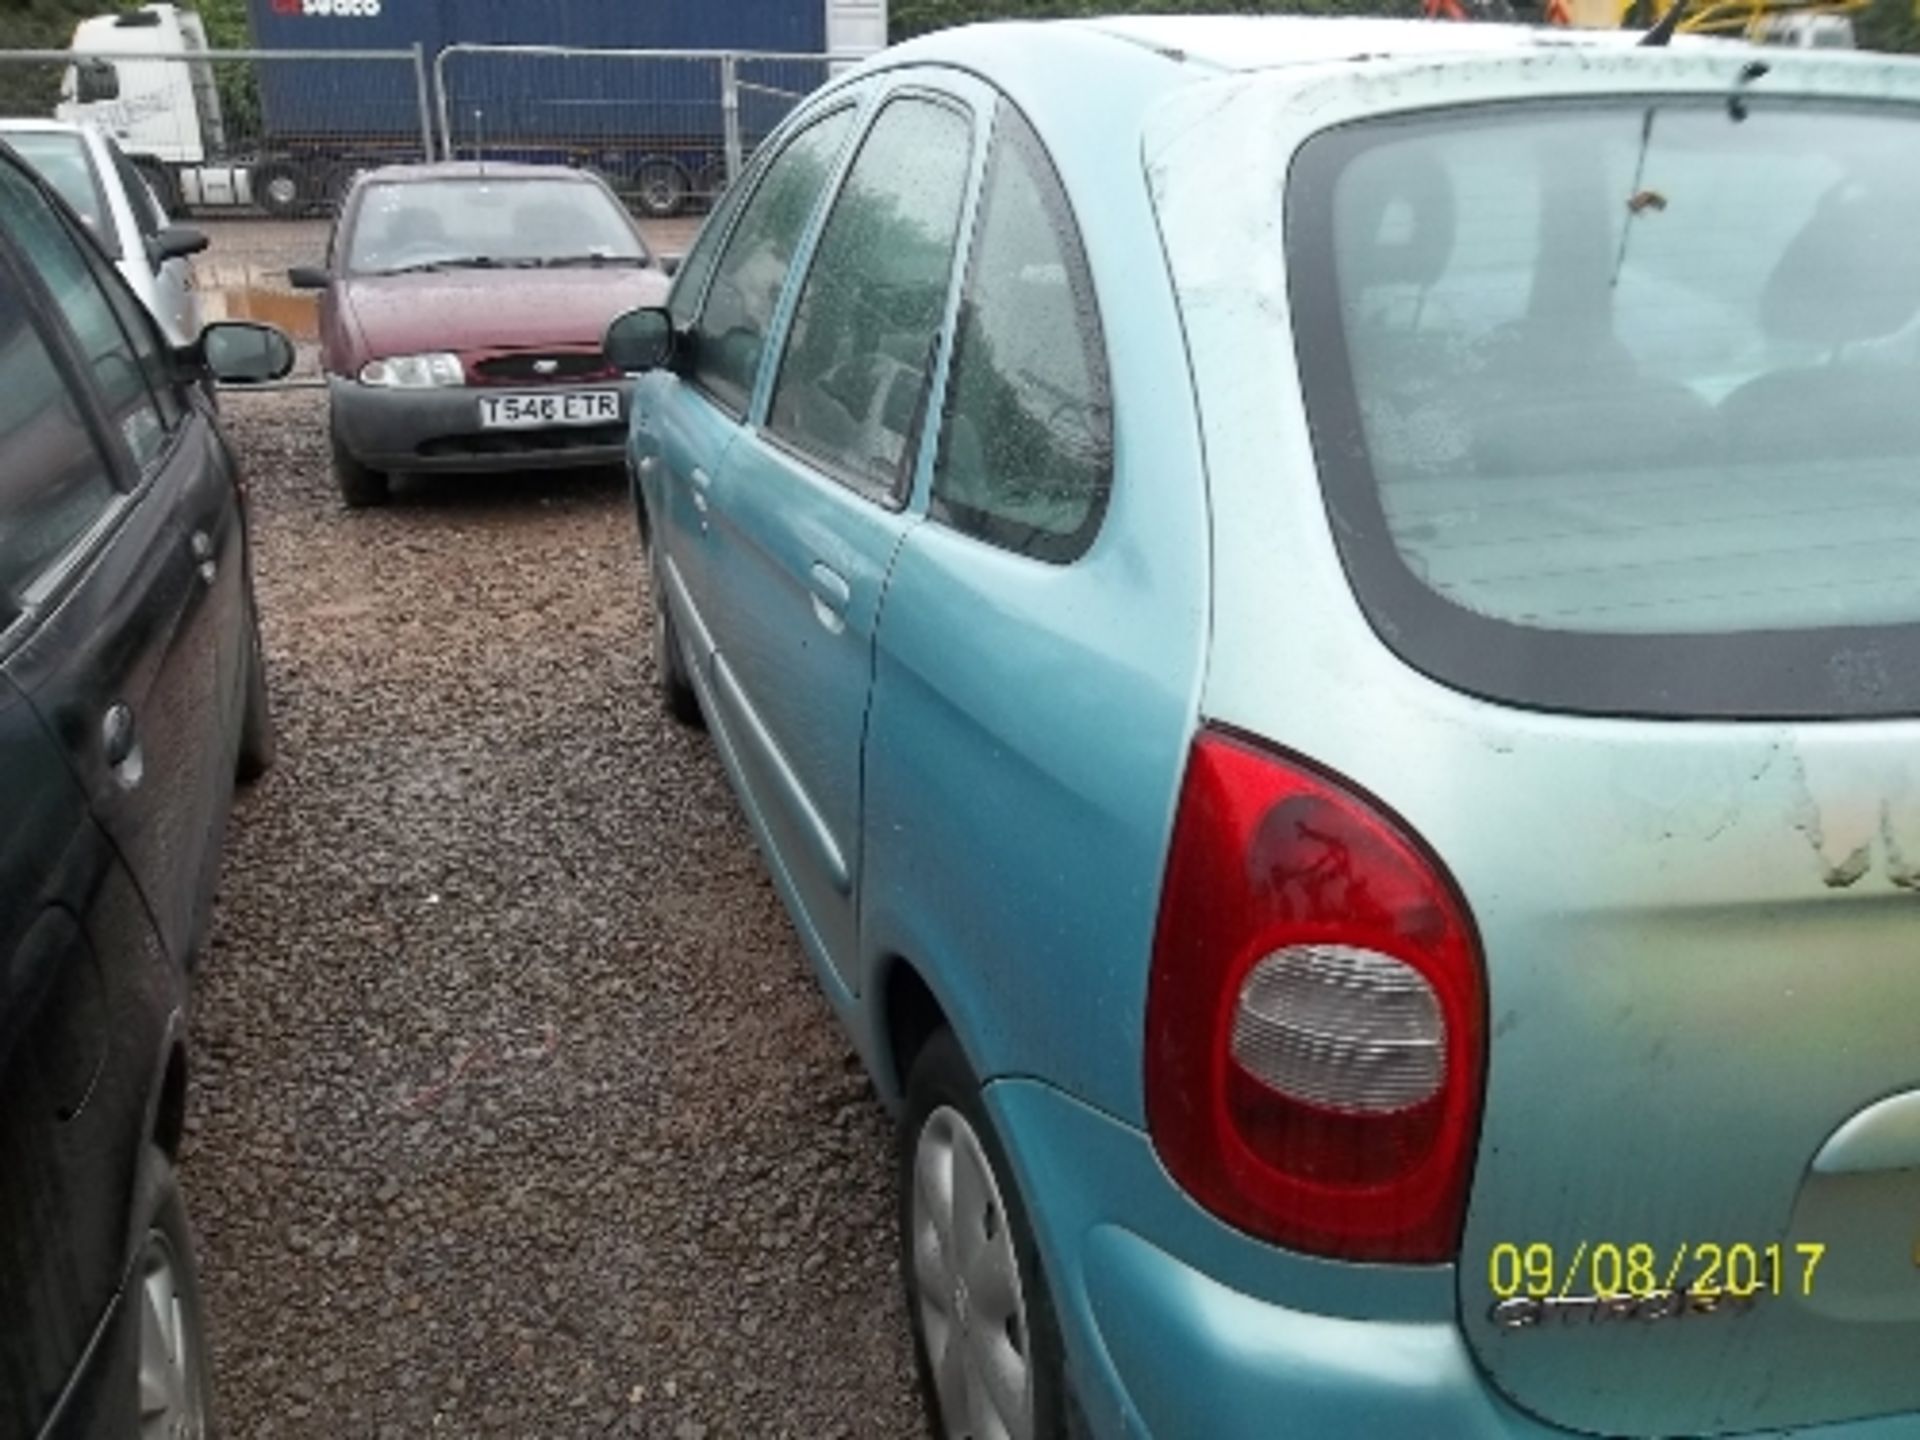 Citroen Xsara Picasso Desire 2HDI - SY53 WPZ Date of registration: 30.09.2003 1997cc, diesel, - Image 4 of 4